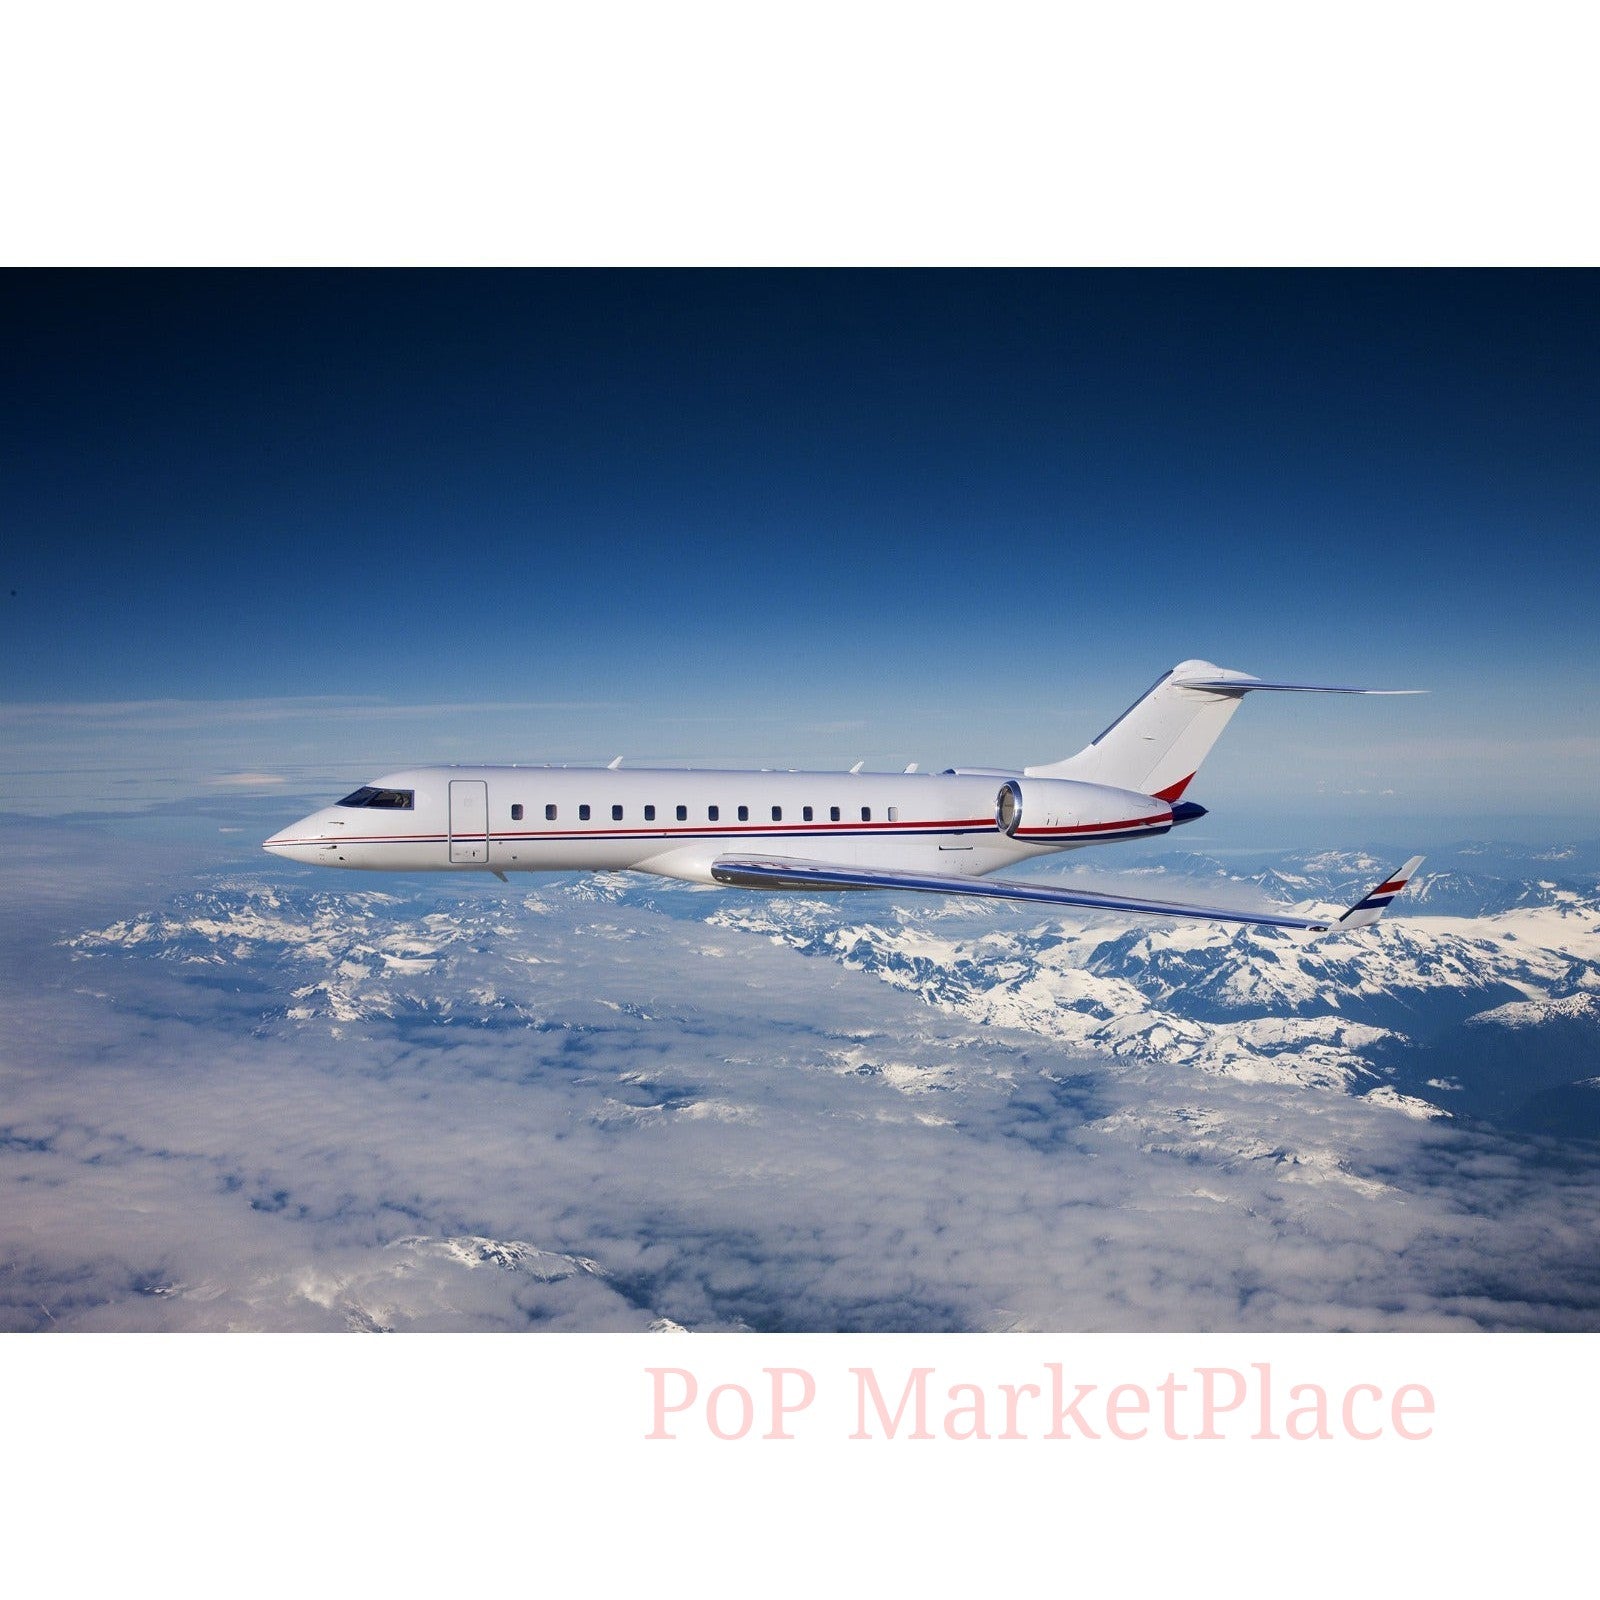 Buy pre-owned jet get access wild marketplace private jets sale Global Airjet